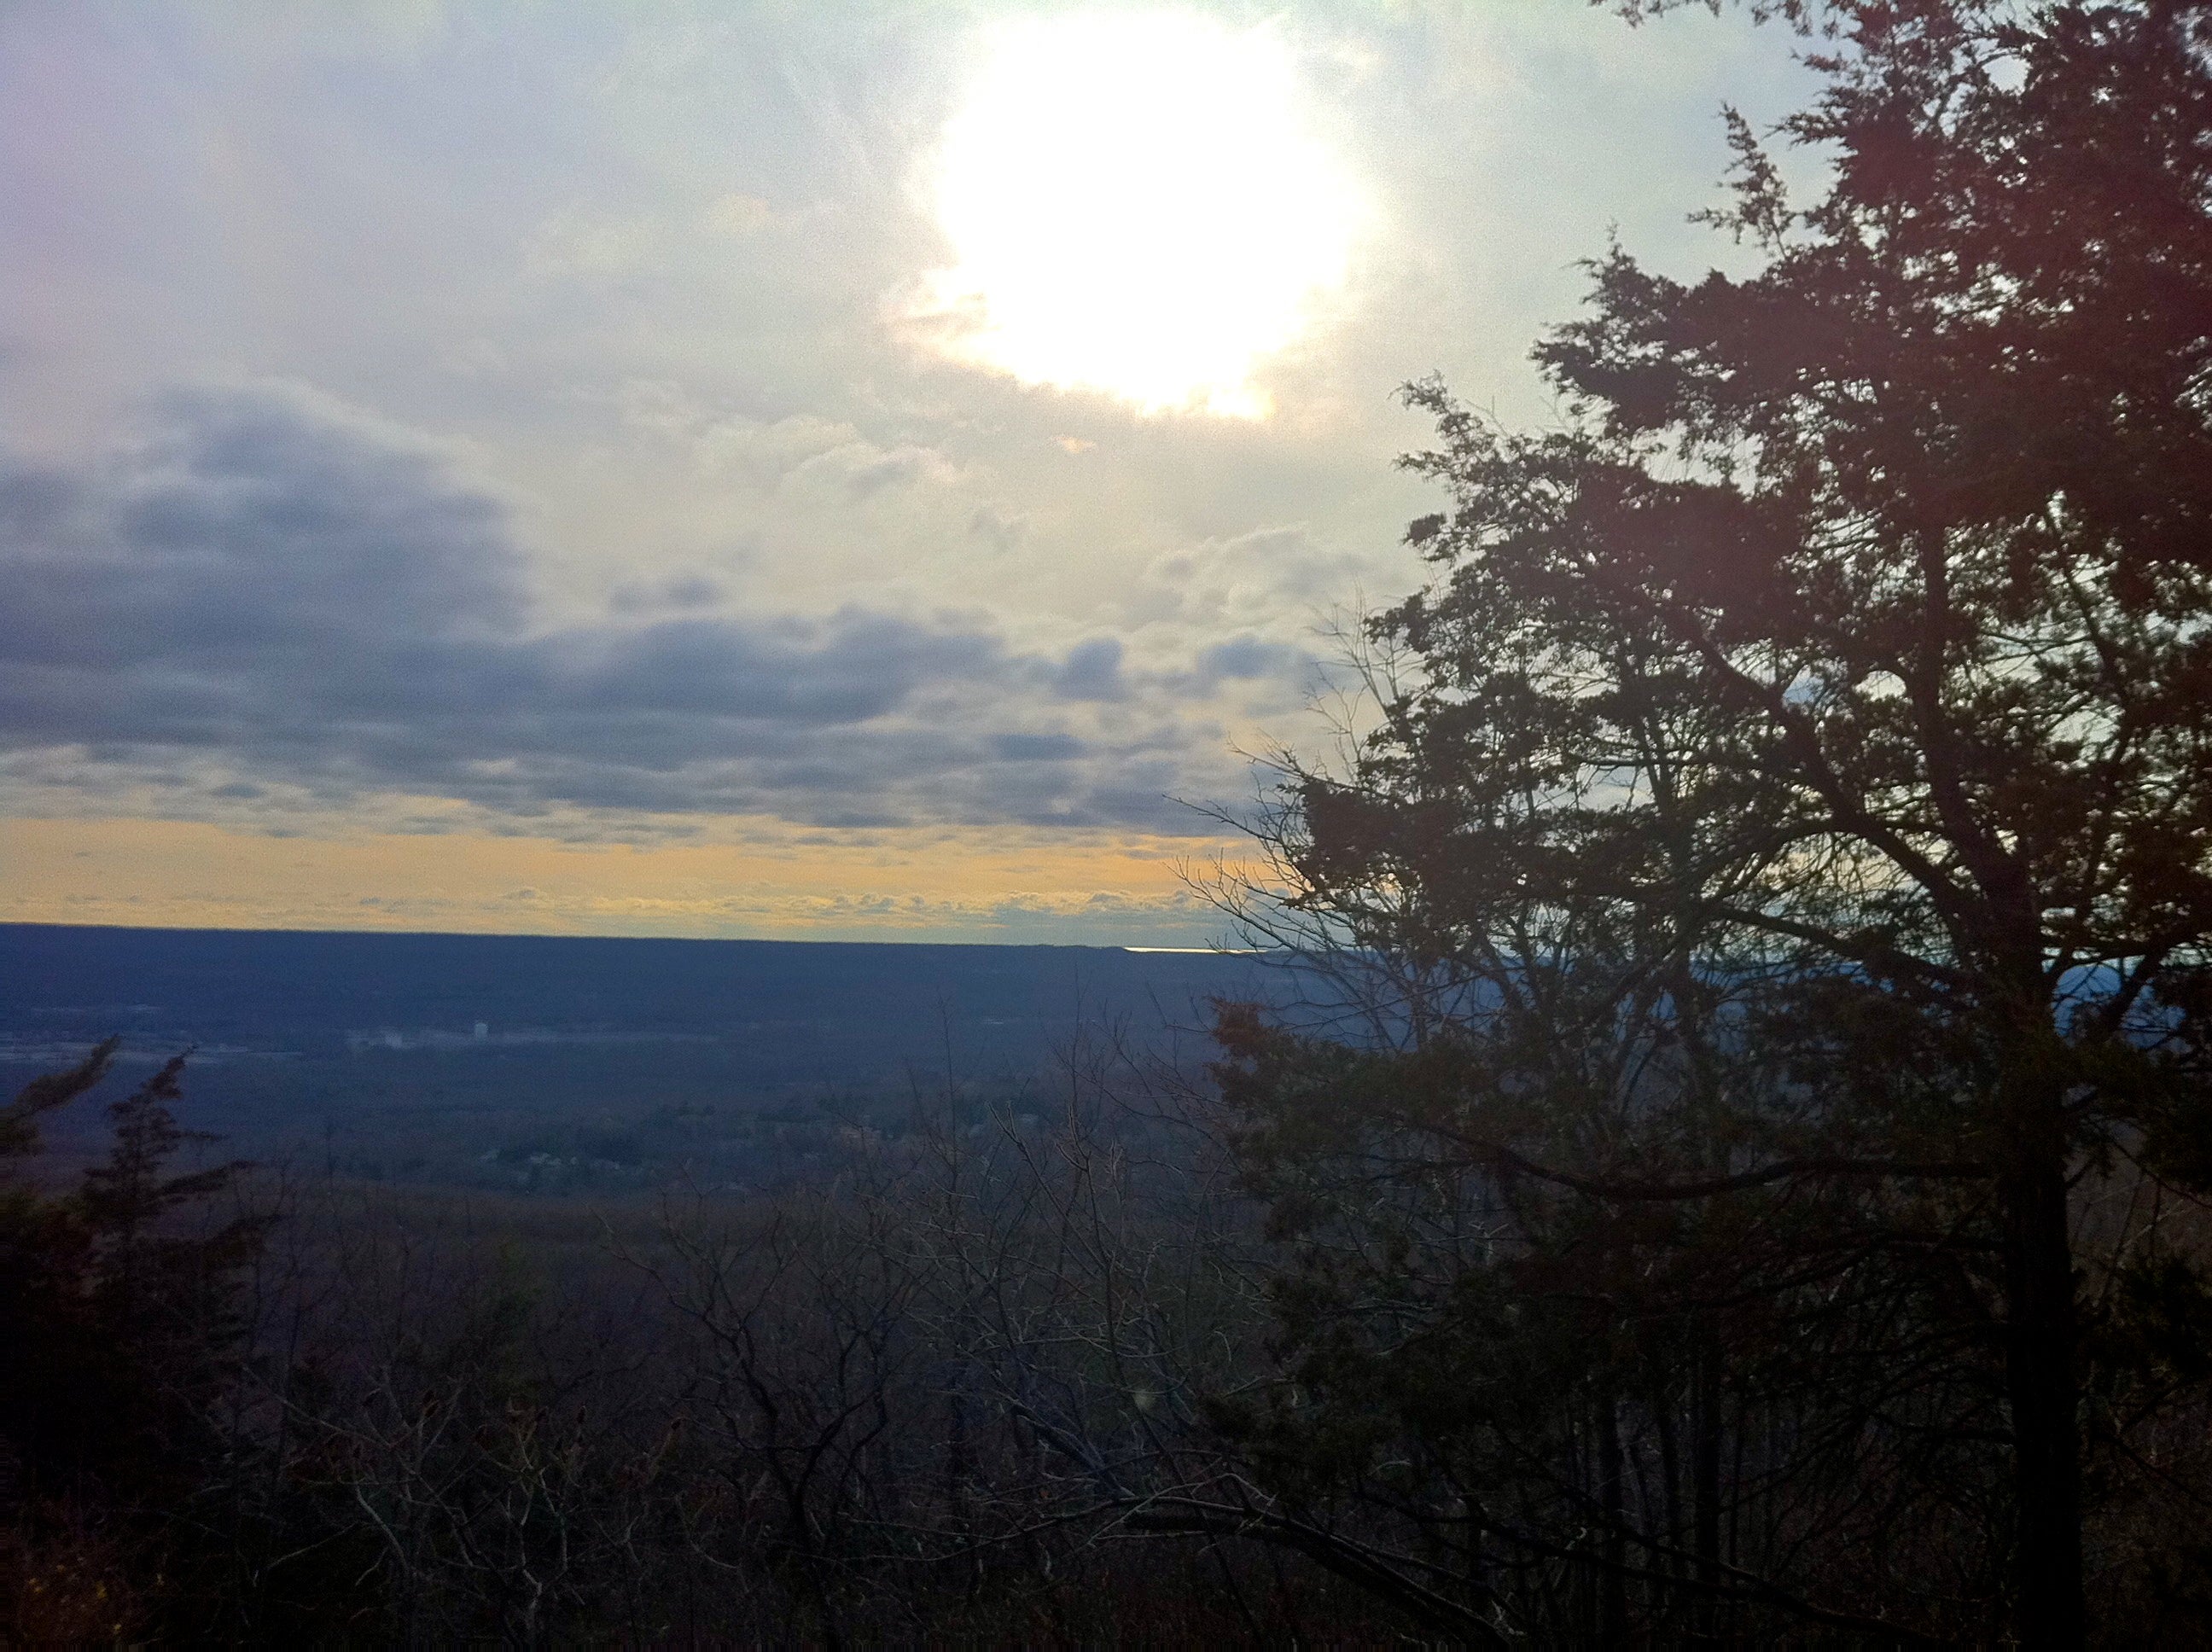 Morning sunrise view from Blue (Quinnipiac) Trail on Hezekiah's Knob in Connecticut's Sleeping Giant State Park.